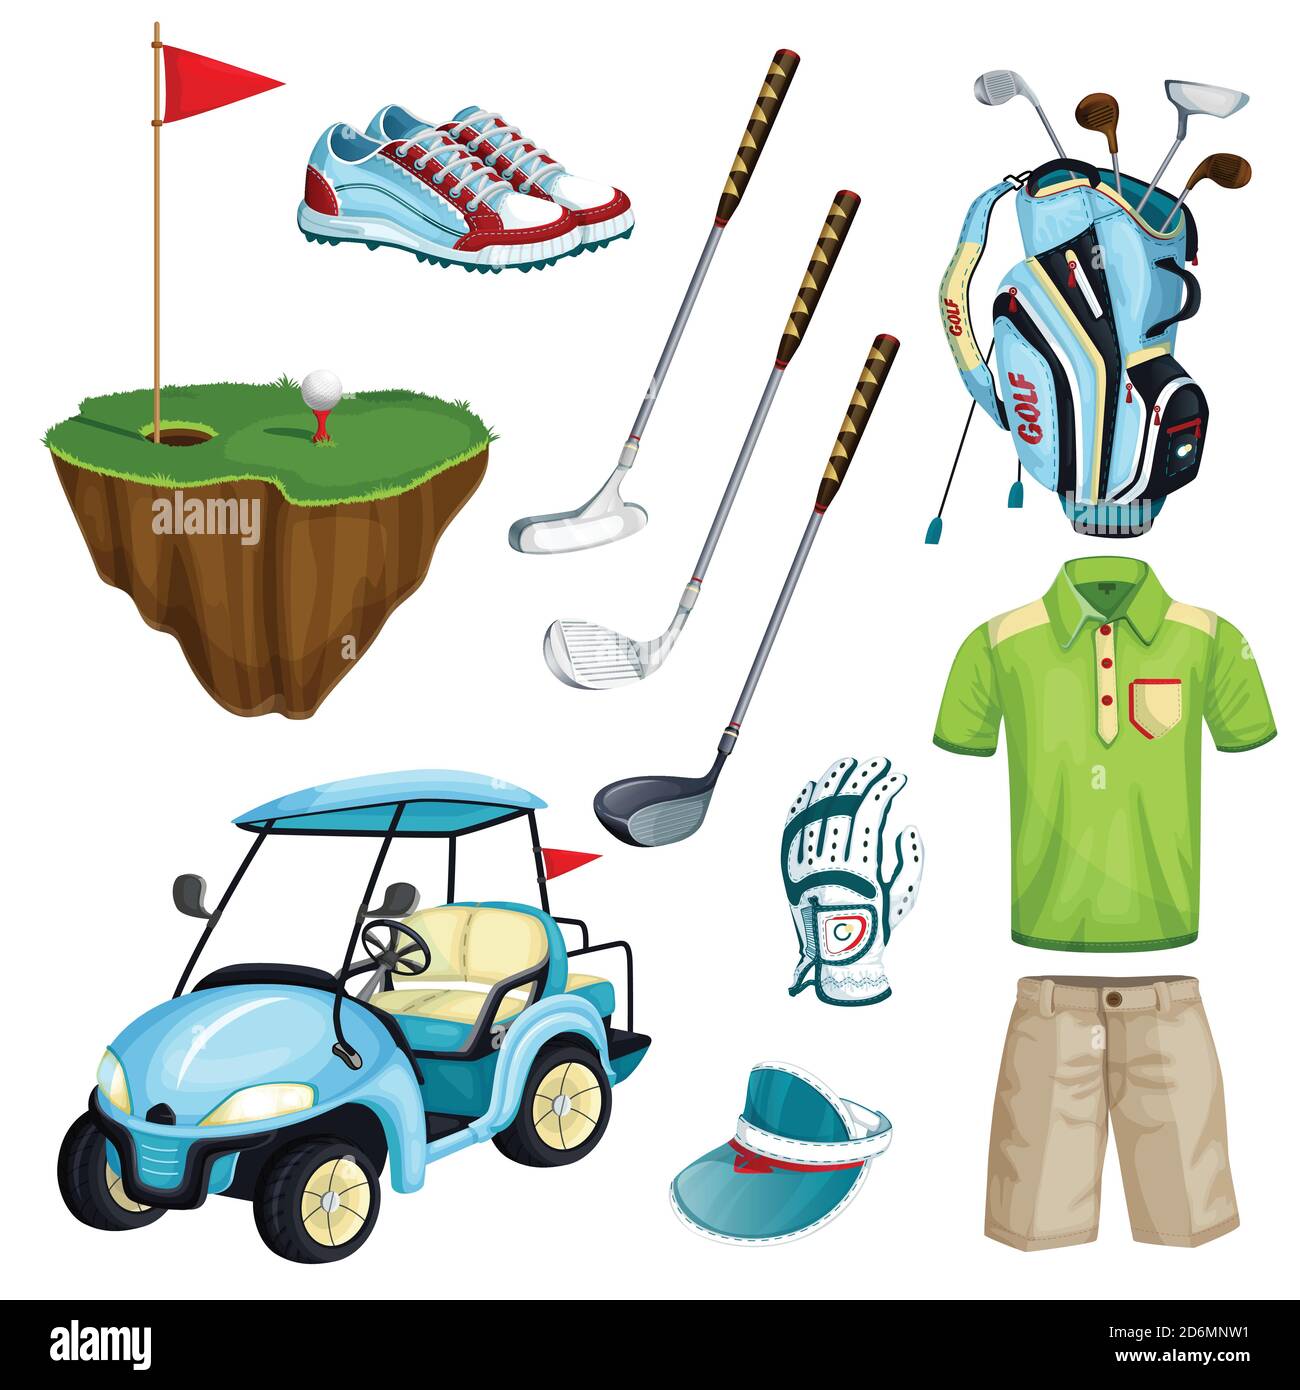 Golf club vector cartoon icons and design elements set. Golf cart, ball, club, bag and clothes illustration. Outdoor leisure activity stuff. Stock Vector